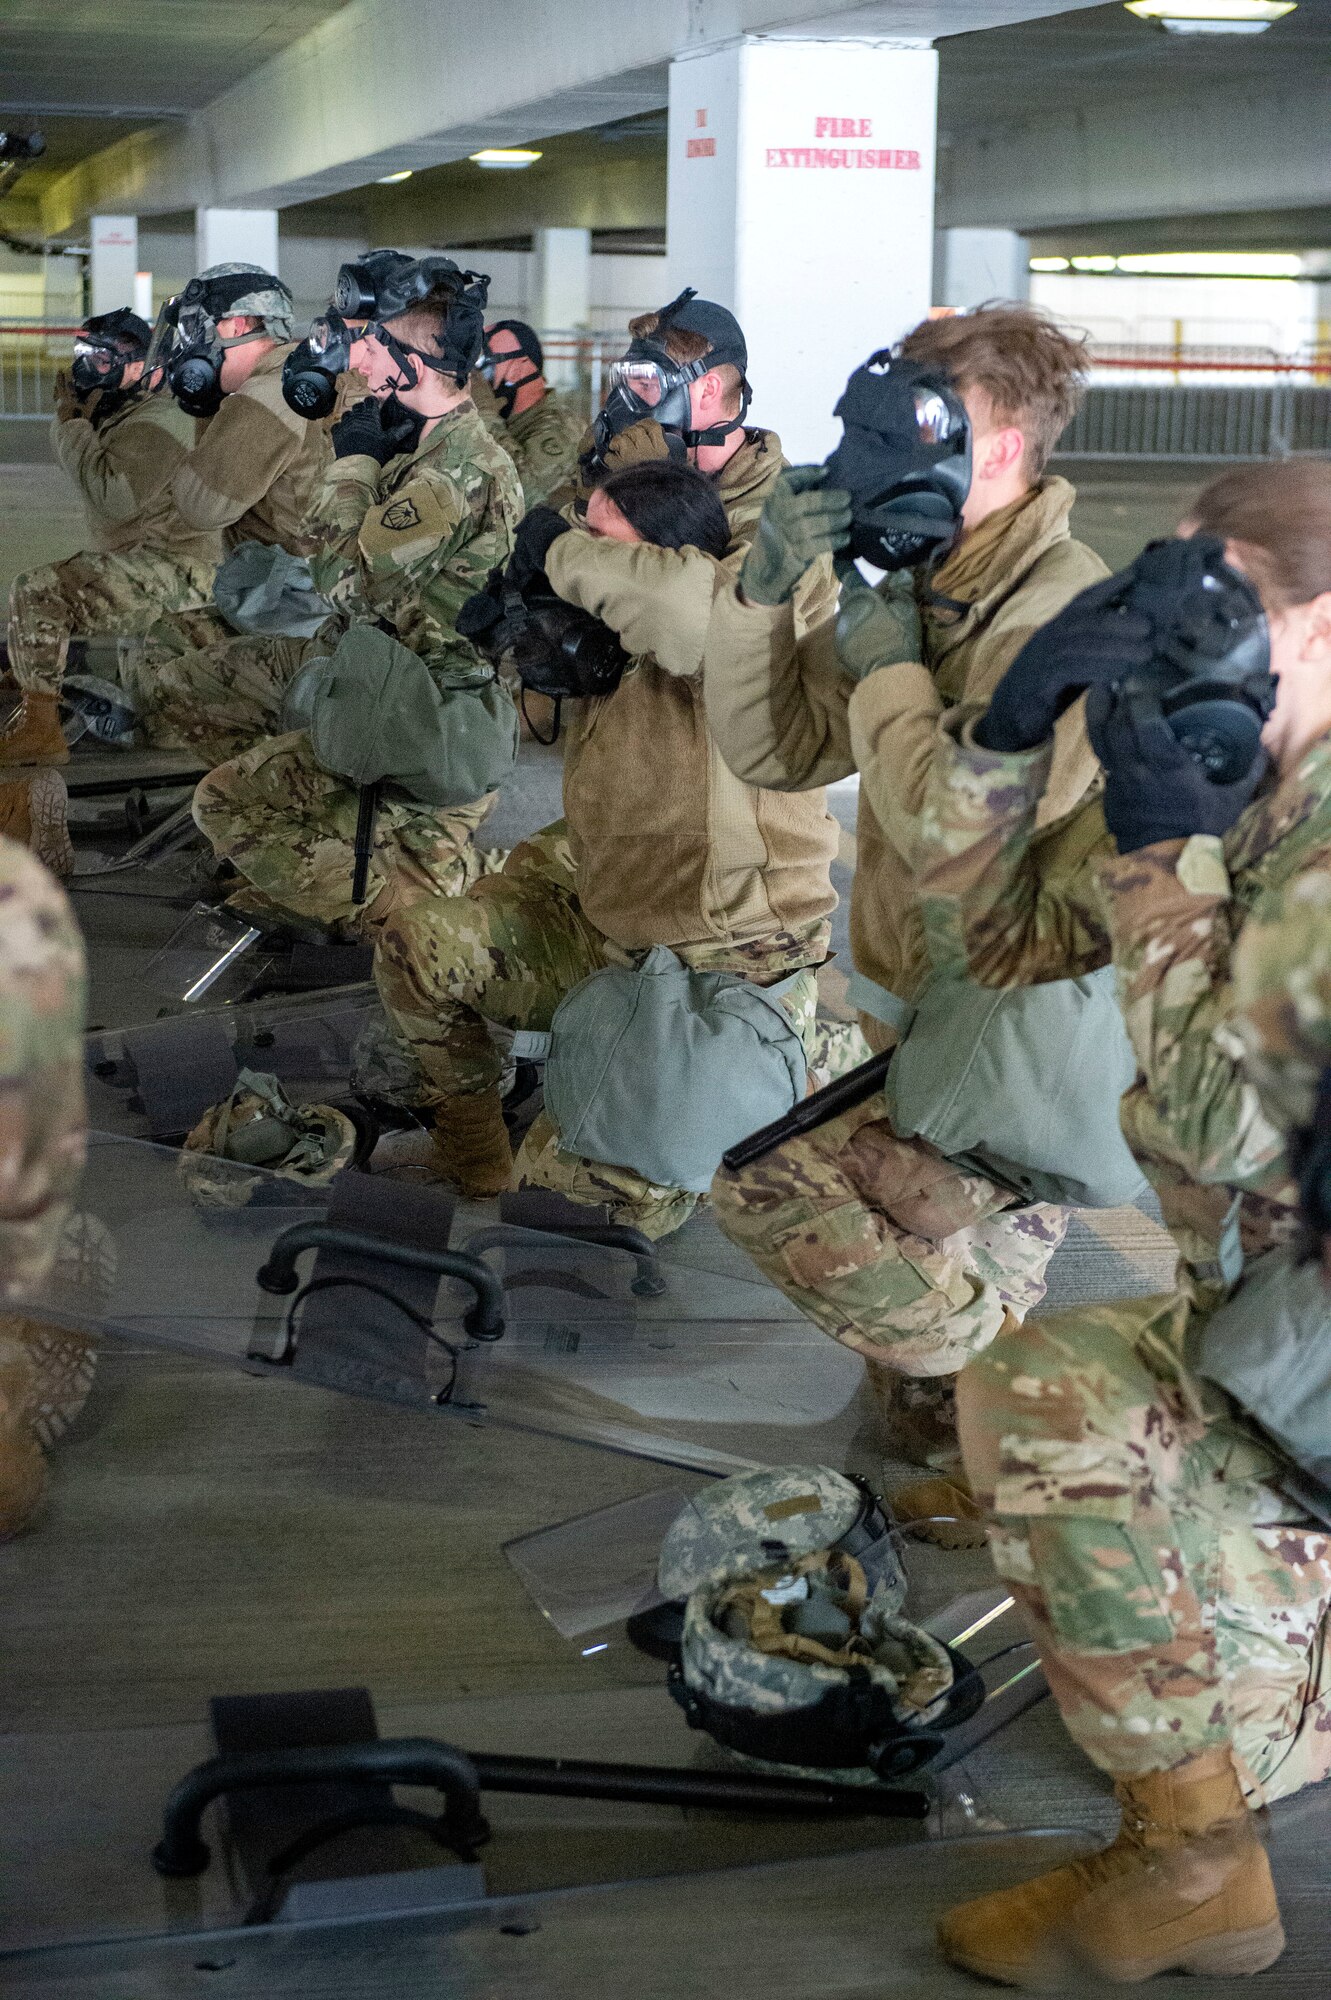 U.S. Air Force Airmen from the 133rd Airlift Wing and U.S. Army National Guard Soldiers participate in civil disturbance control training to strengthen partnerships between local law enforcement and the Minnesota National Guard in St. Paul, Minn., April 20, 2021.